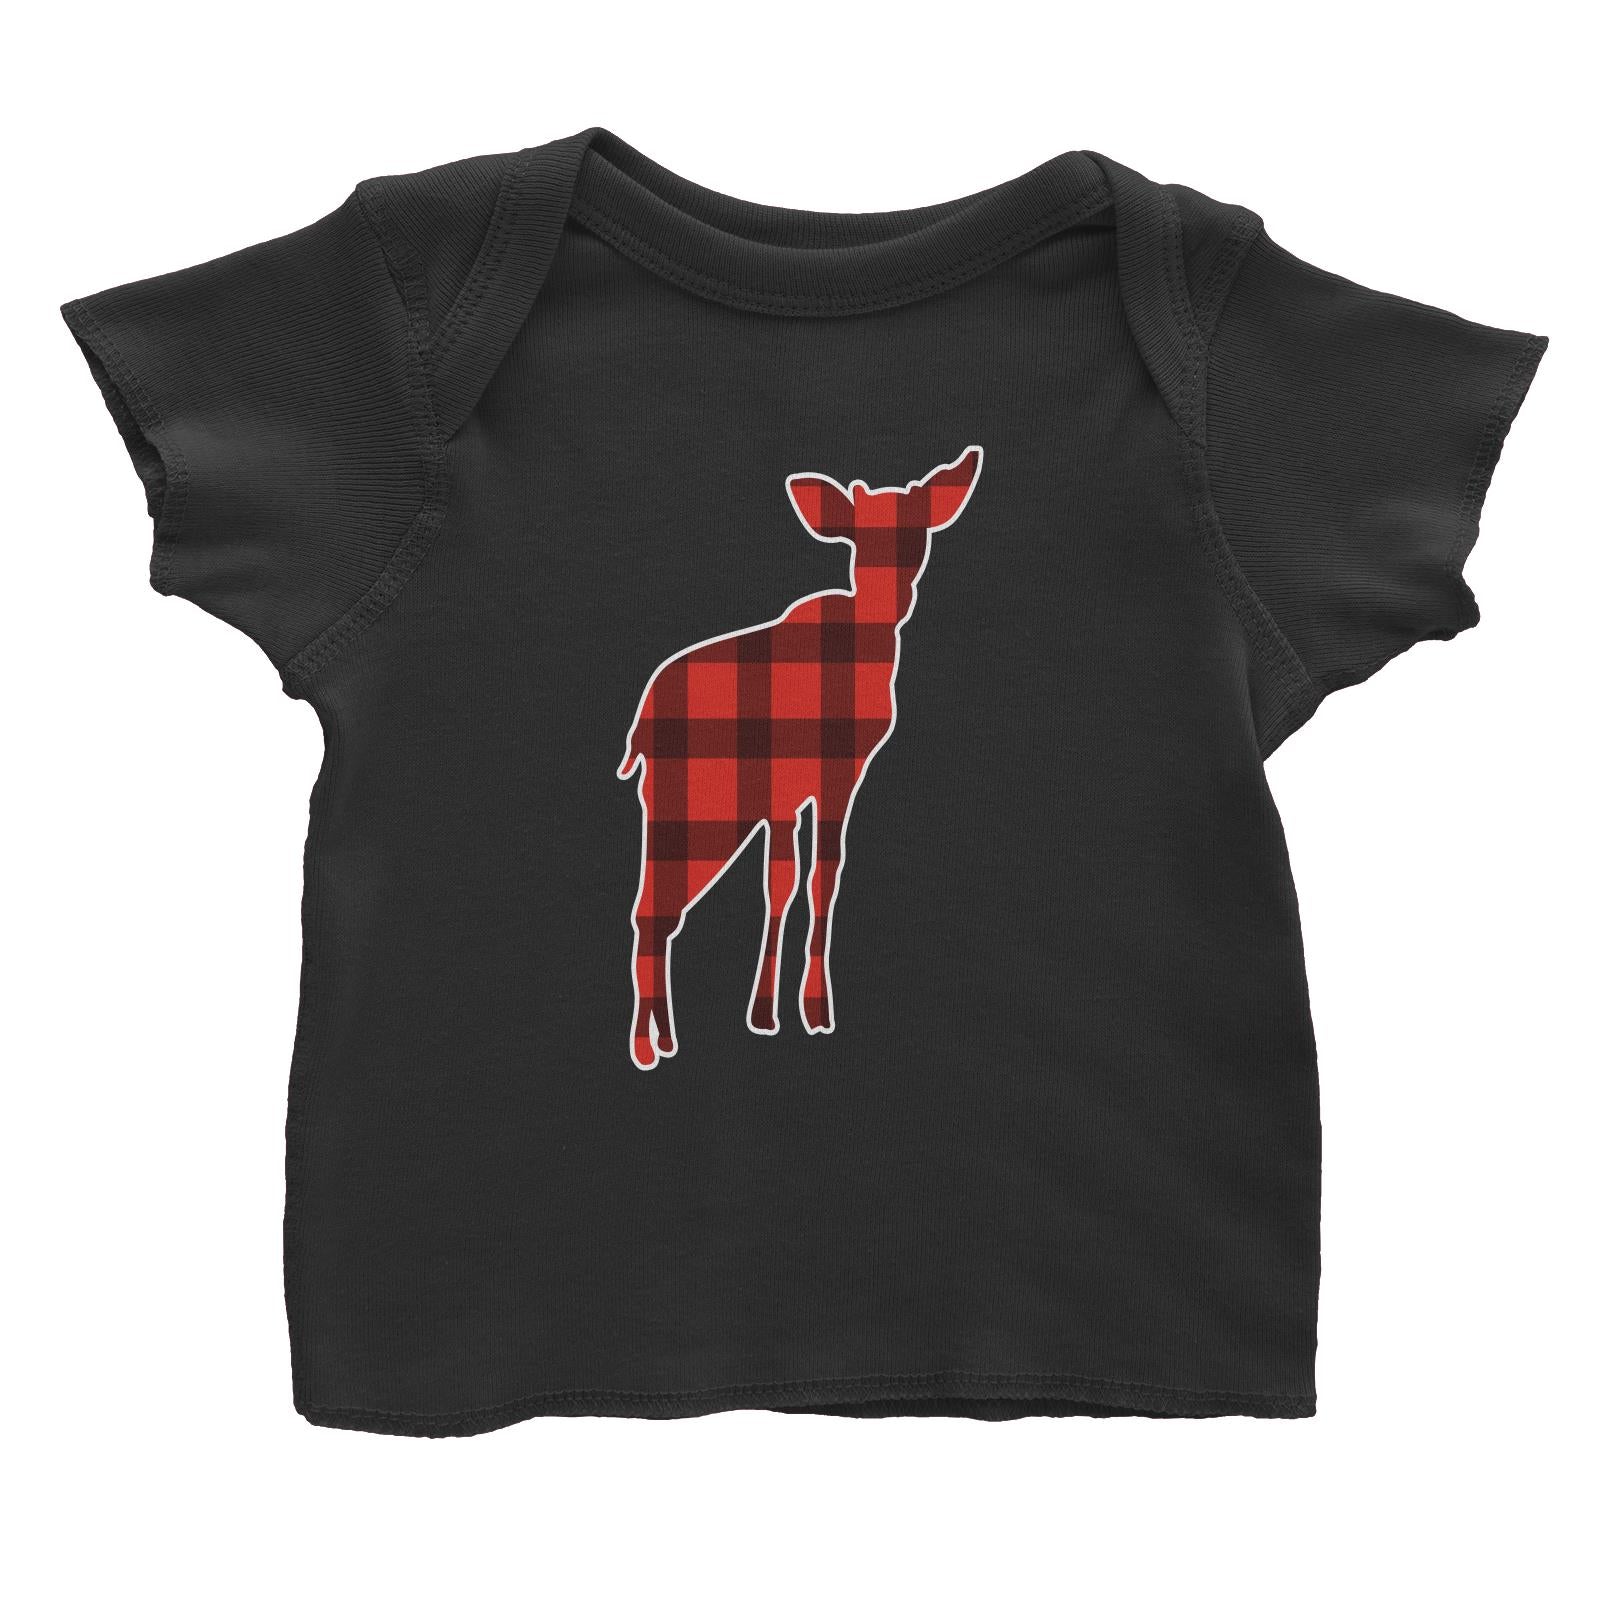 Baby Deer Silhouette Checkered Pattern Baby T-Shirt Christmas Matching Family Animal